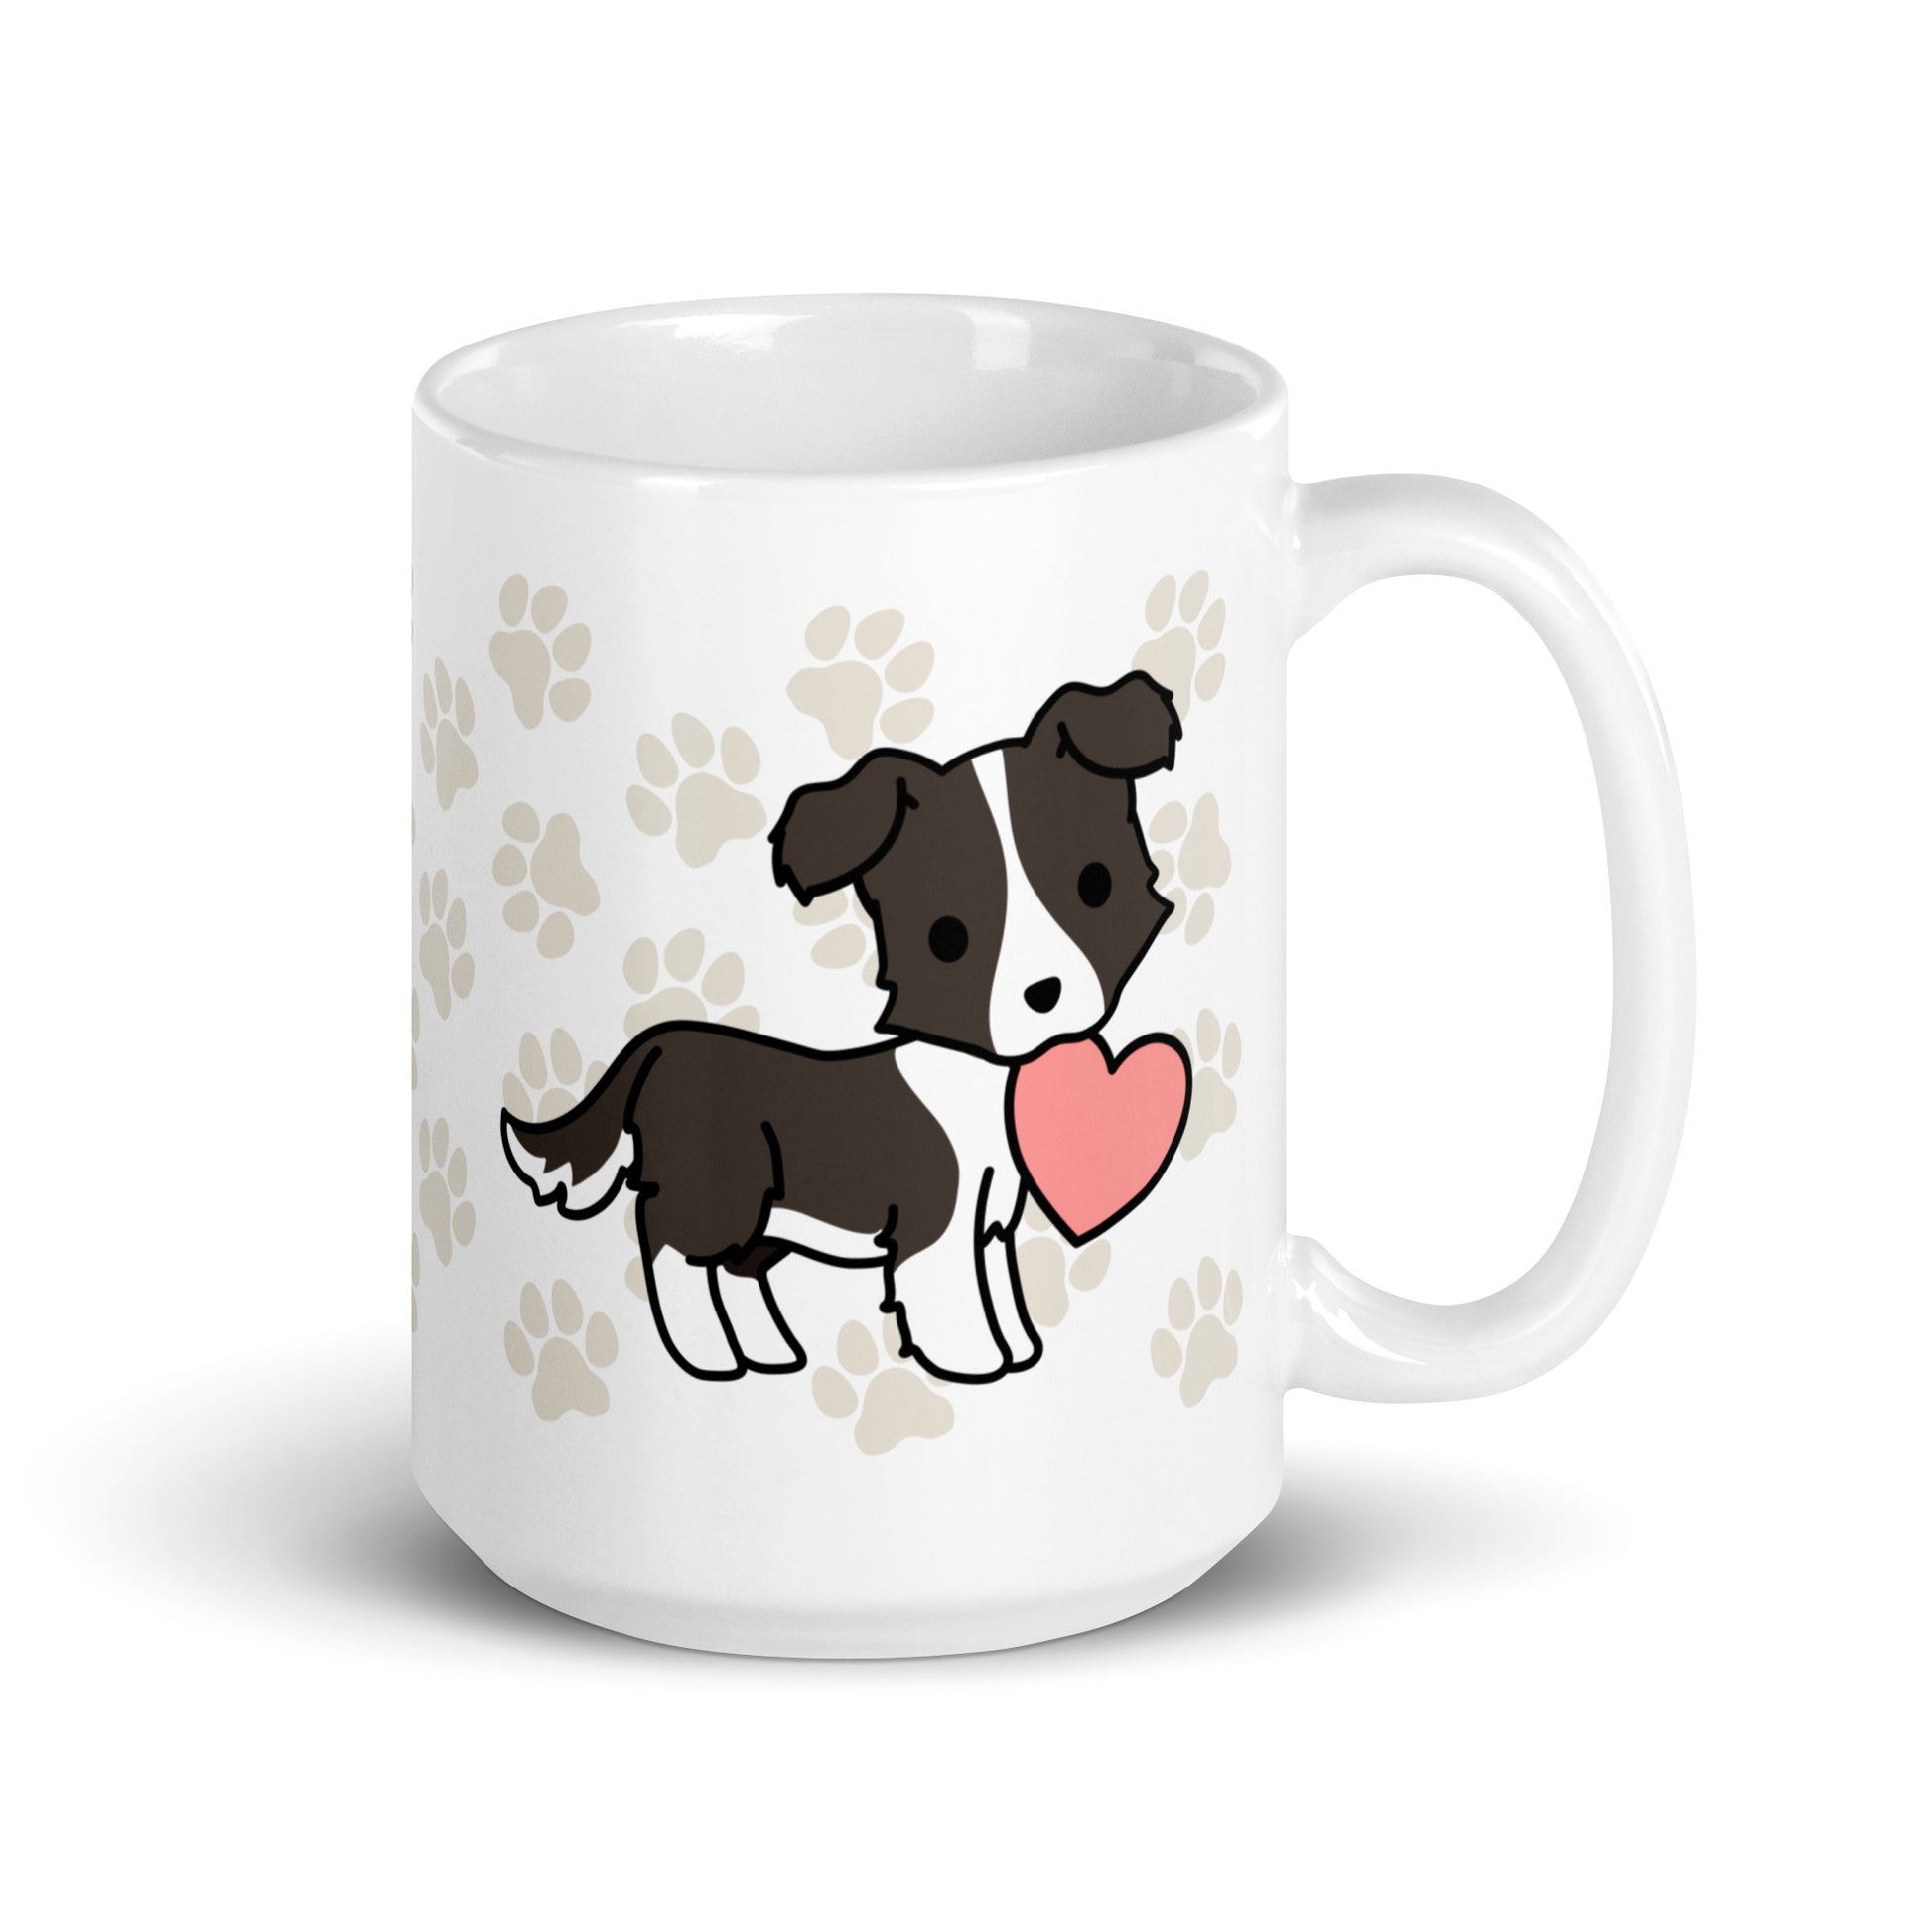 A white 15 ounce ceramic mug with a pattern of light brown pawprints all over. The mug also features a stylized illustration of a Border Collie holding a heart in its mouth.